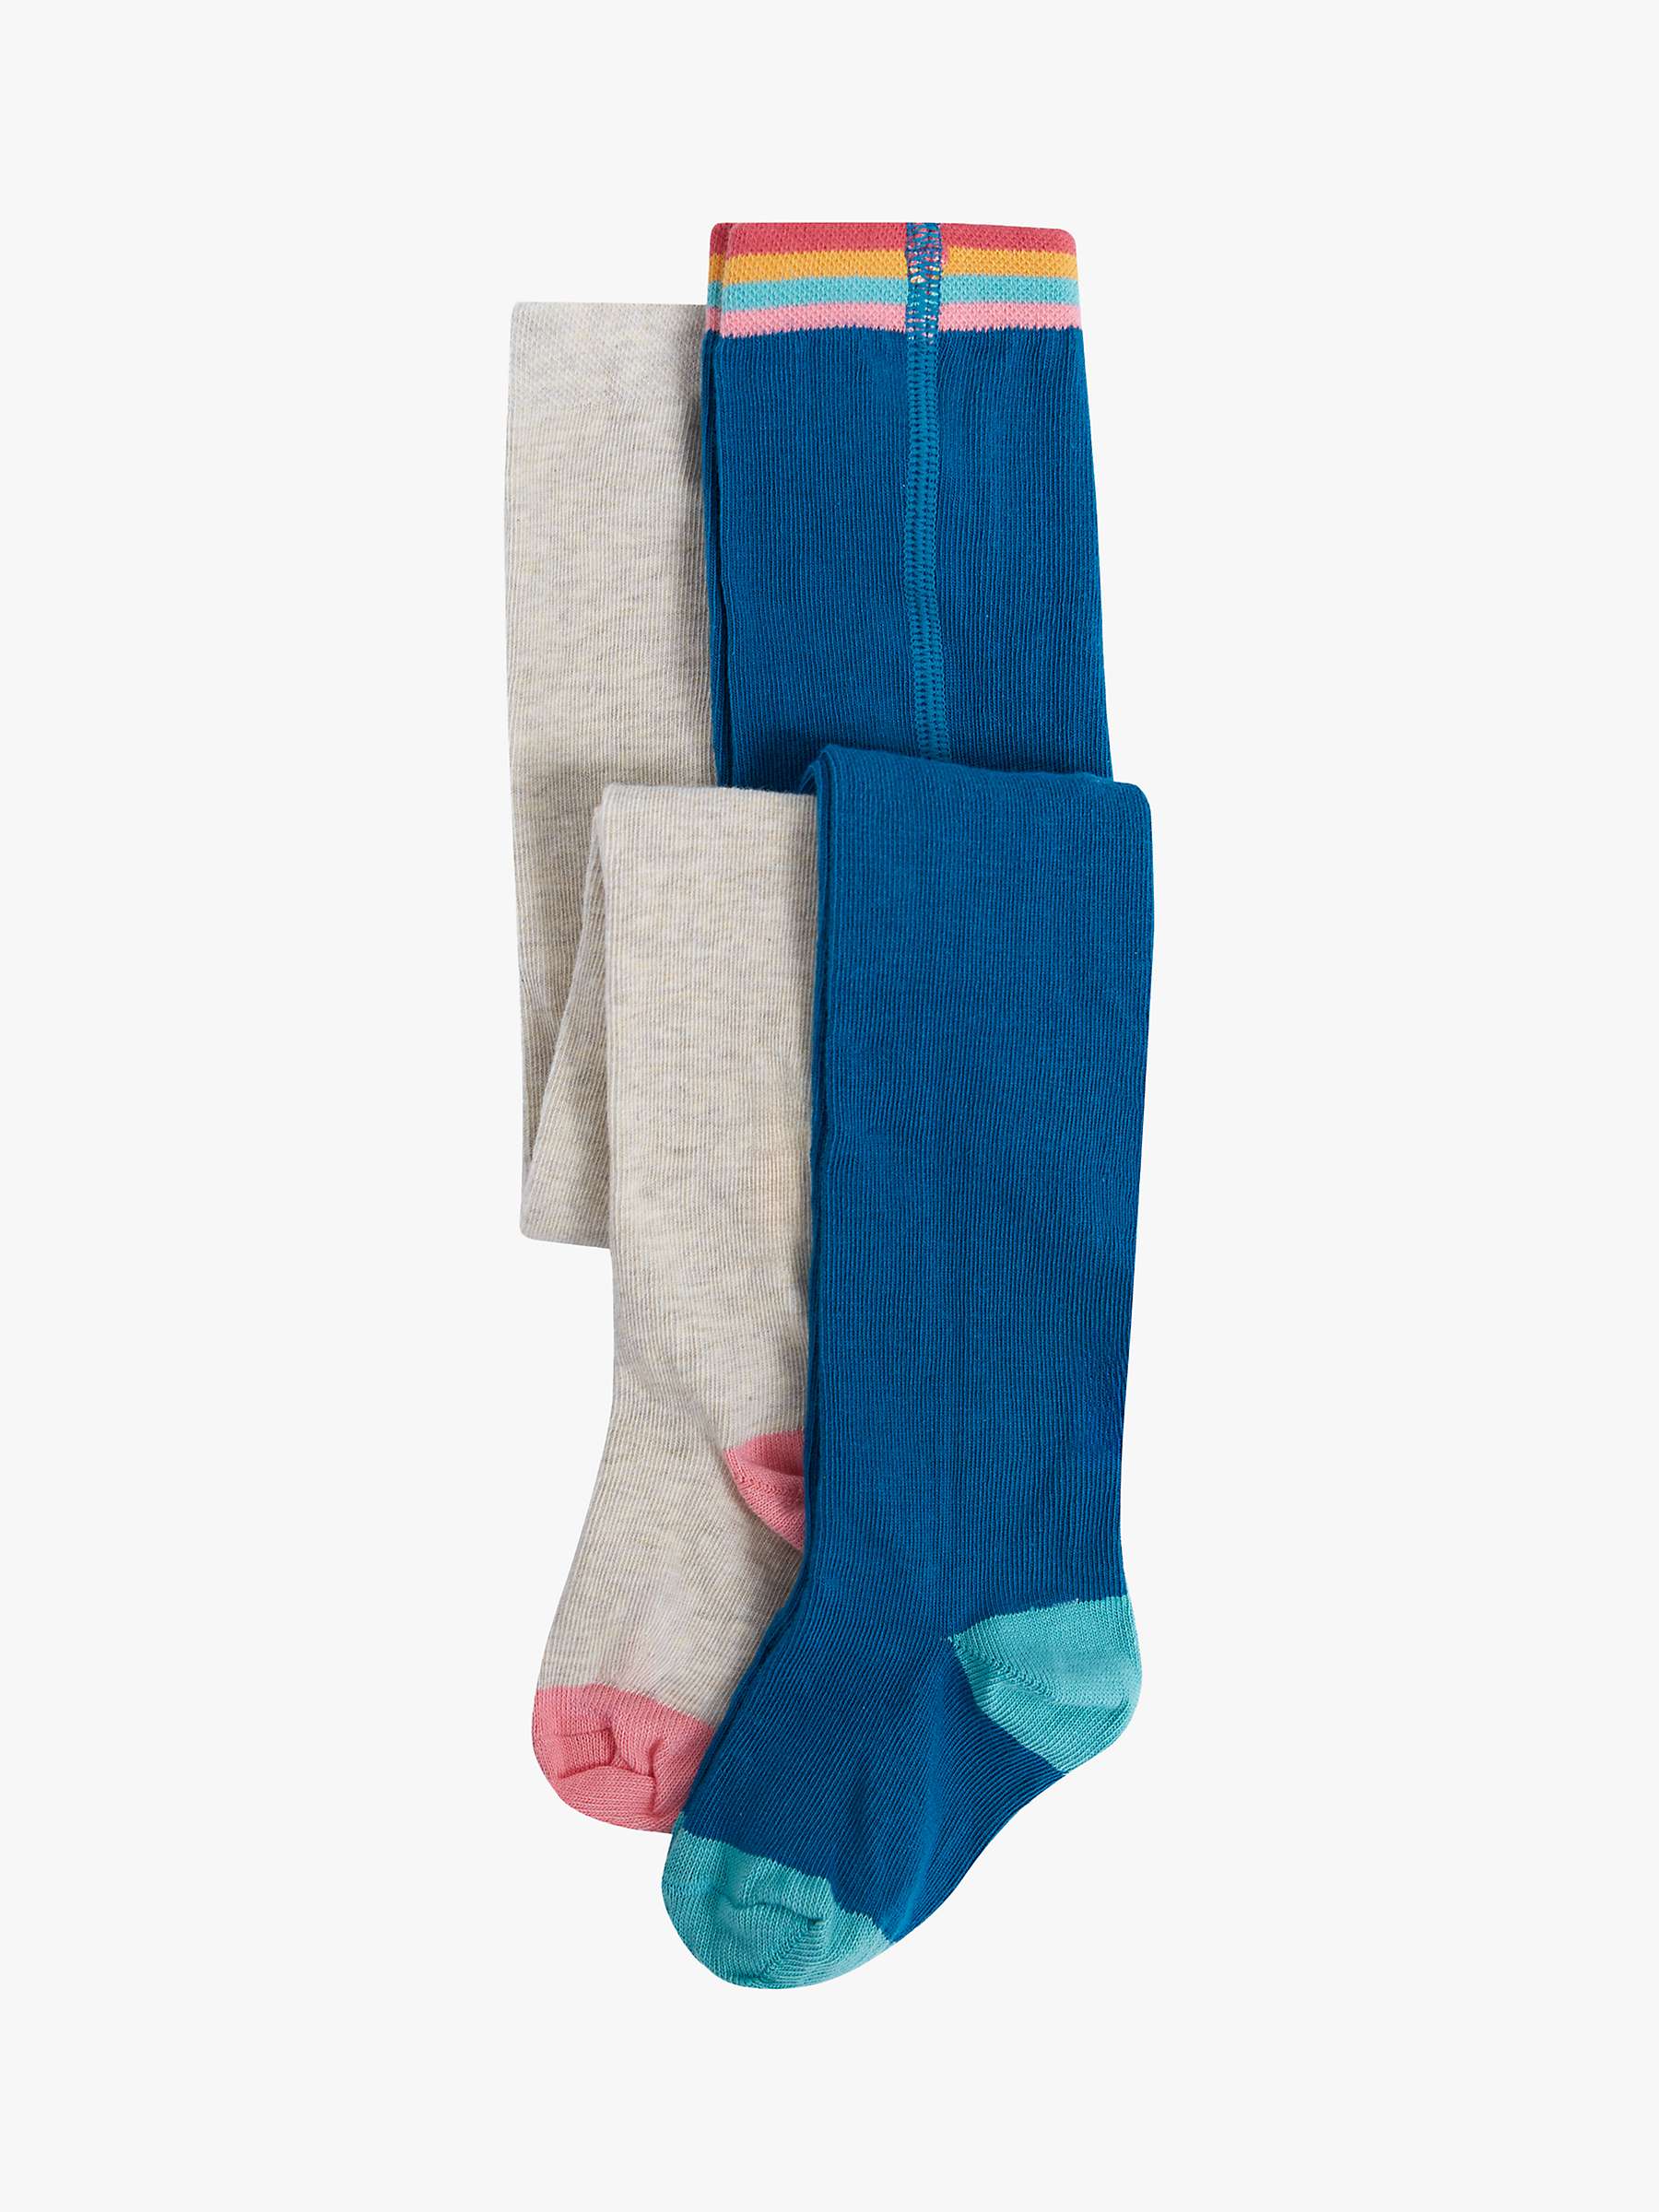 Buy Frugi Baby Norah Organic Cotton Tights, Pack of 2, Oatmeal/Loch Blue Online at johnlewis.com